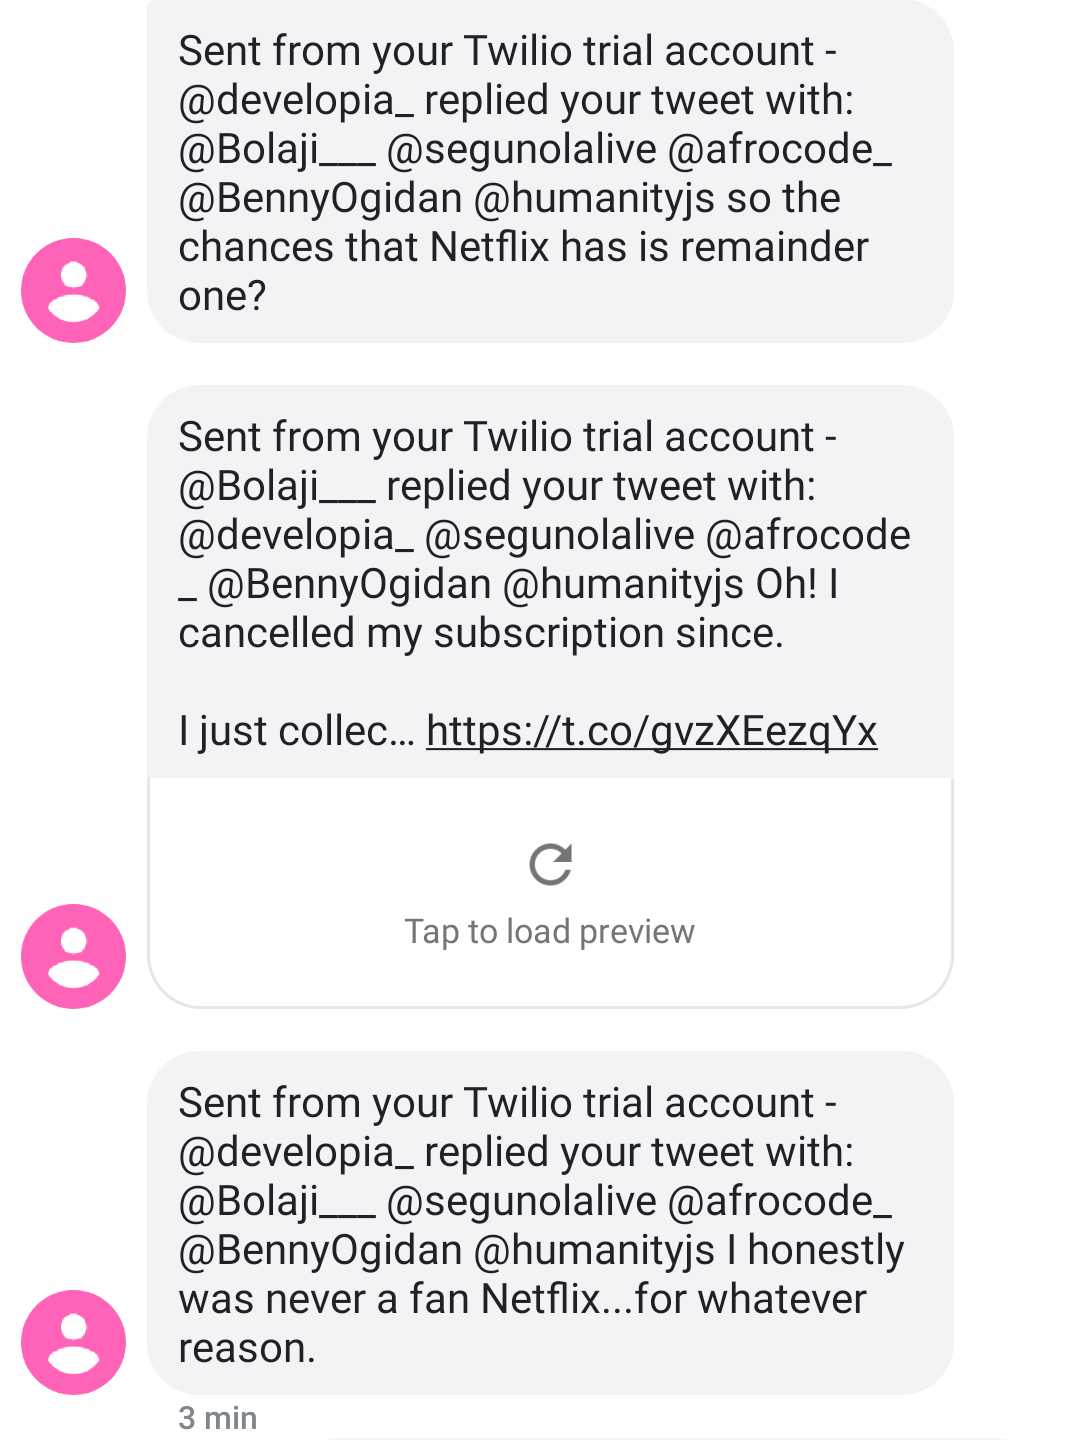 Sample SMS messages showing Twitter retweets and mentions forwarded through a custom JavaScript application using the Twitter API and Twilio SMS